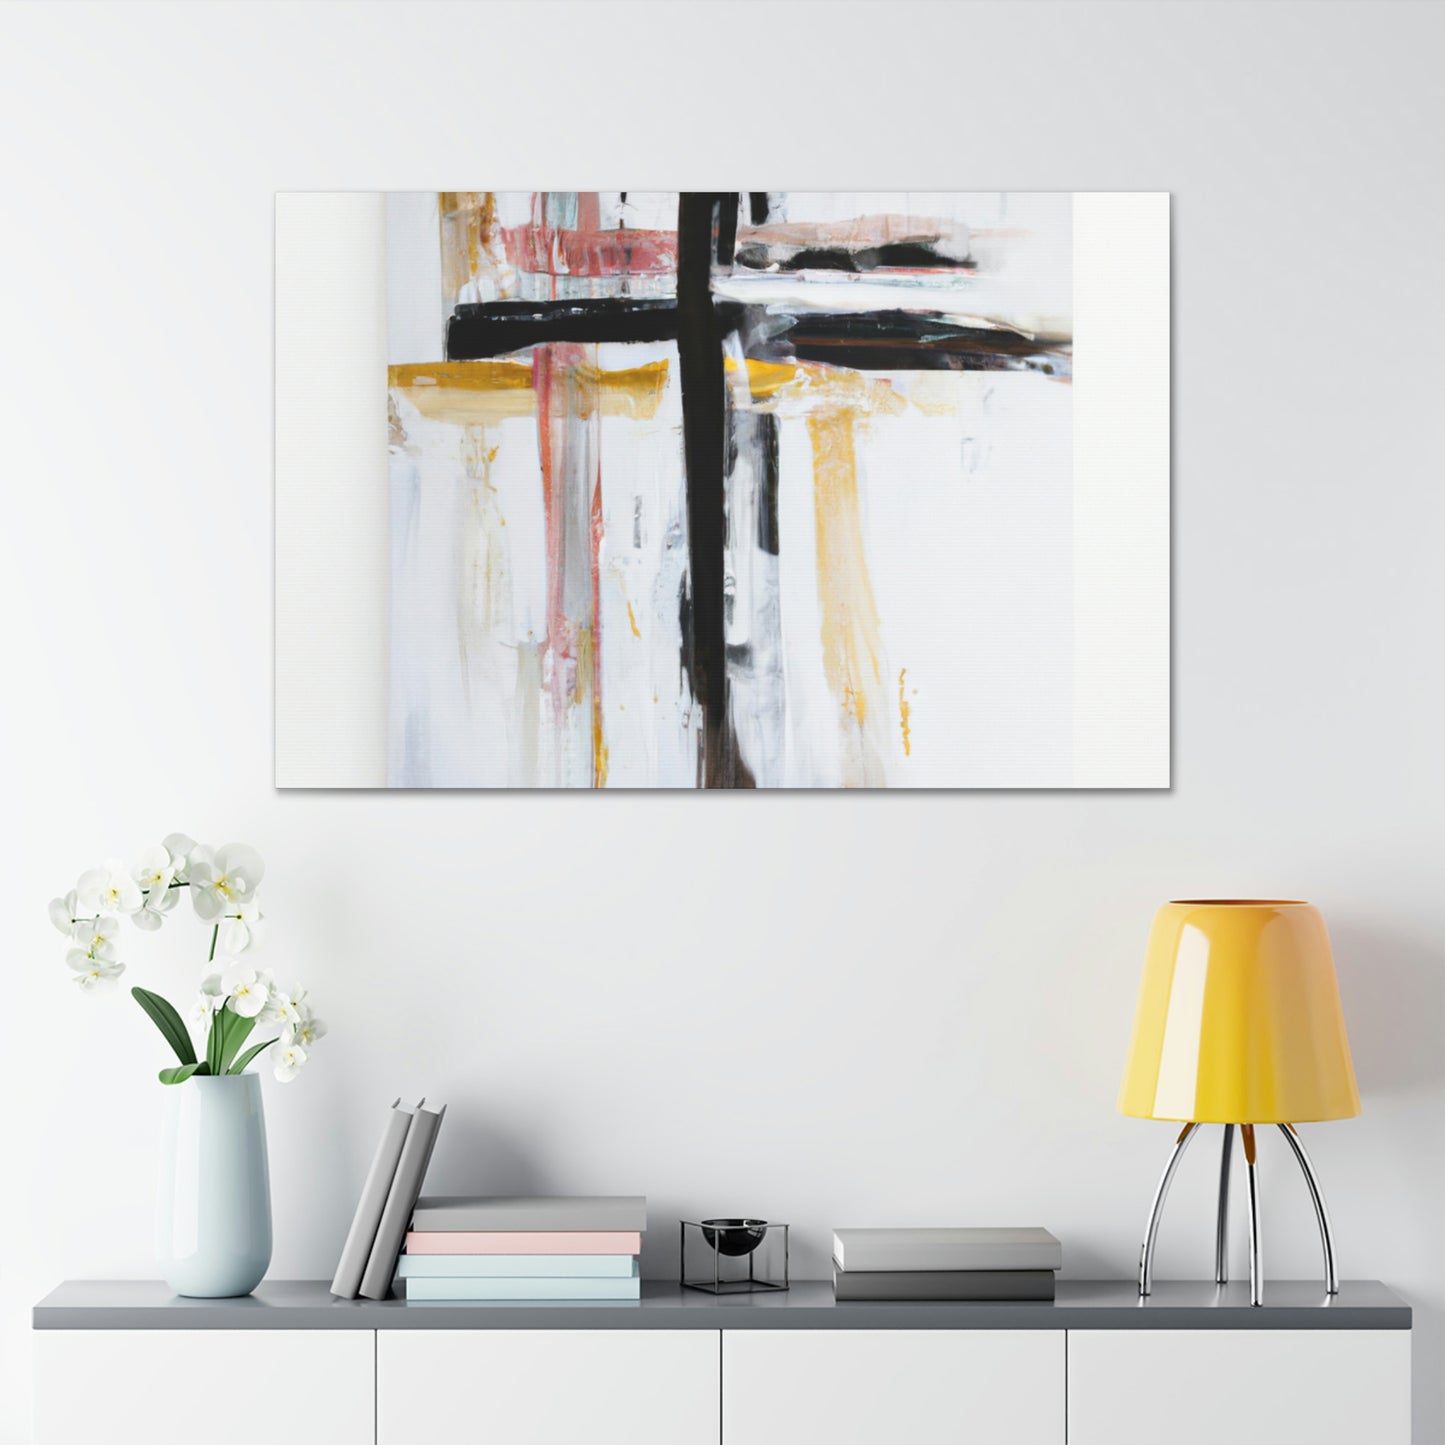 Hebrews 10:25

"Not giving up meeting together, as some are in the habit of doing, but encouraging one another—and all the more as you see the Day approaching." - Canvas Wall Art